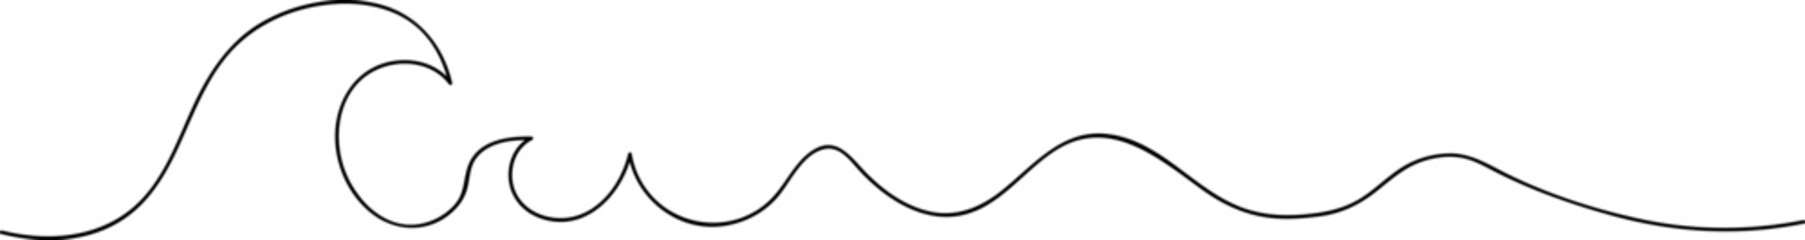 Sea ocean wave one line drawing. Continuous line. Simple. Line art. Black and white. Vector illustration.